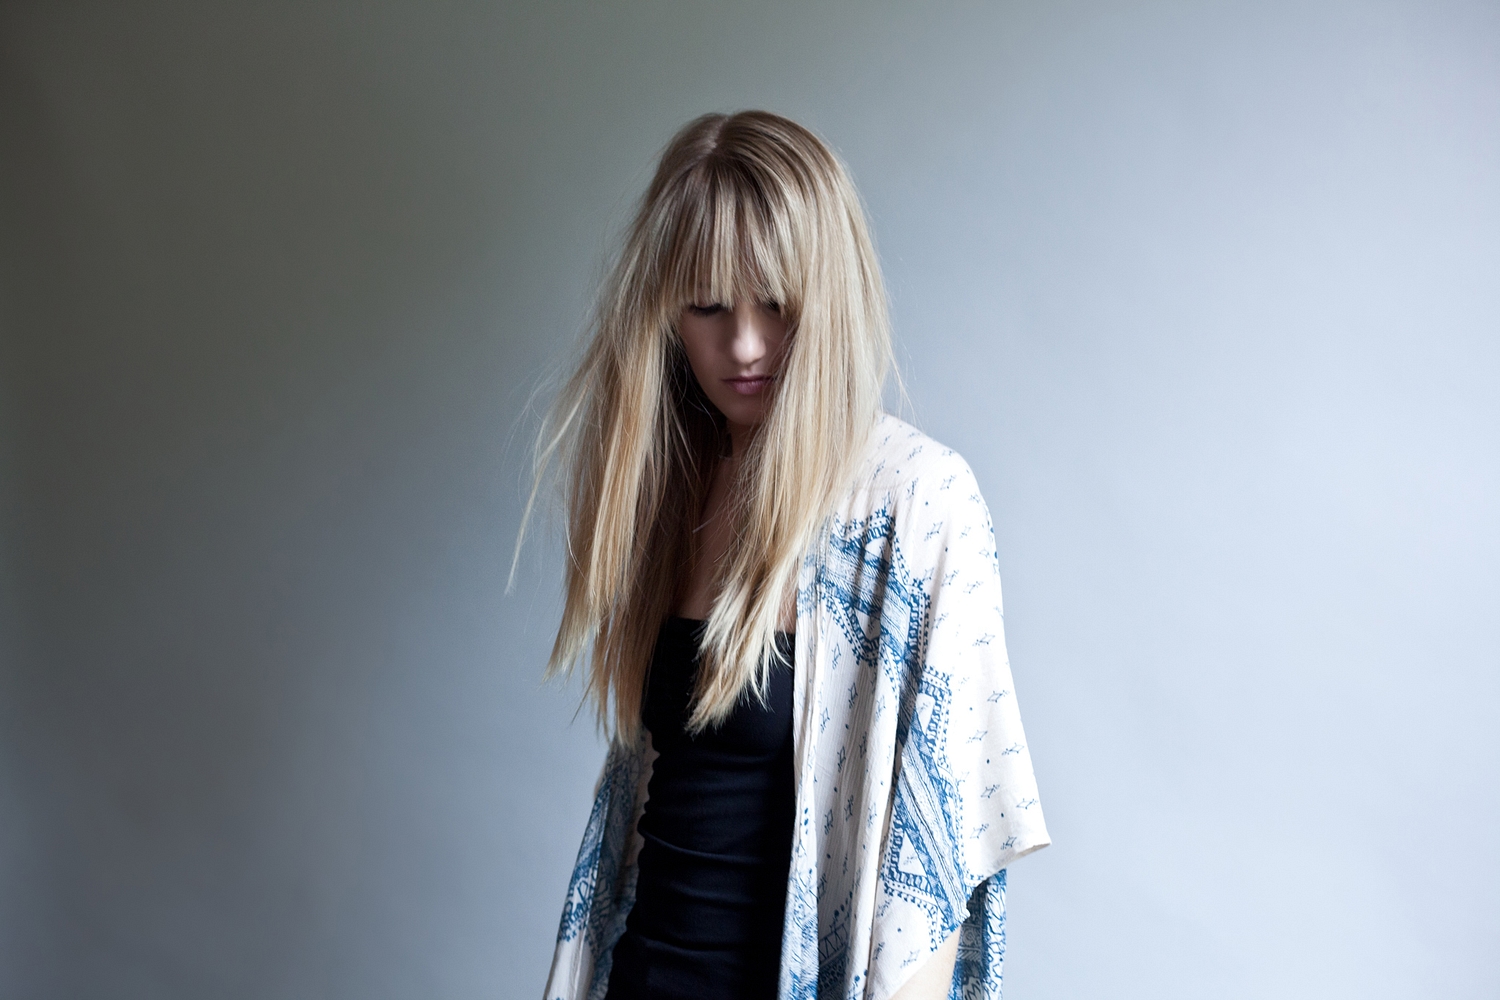 Robyn Sherwell walks ‘Tightropes’ with her daring new single